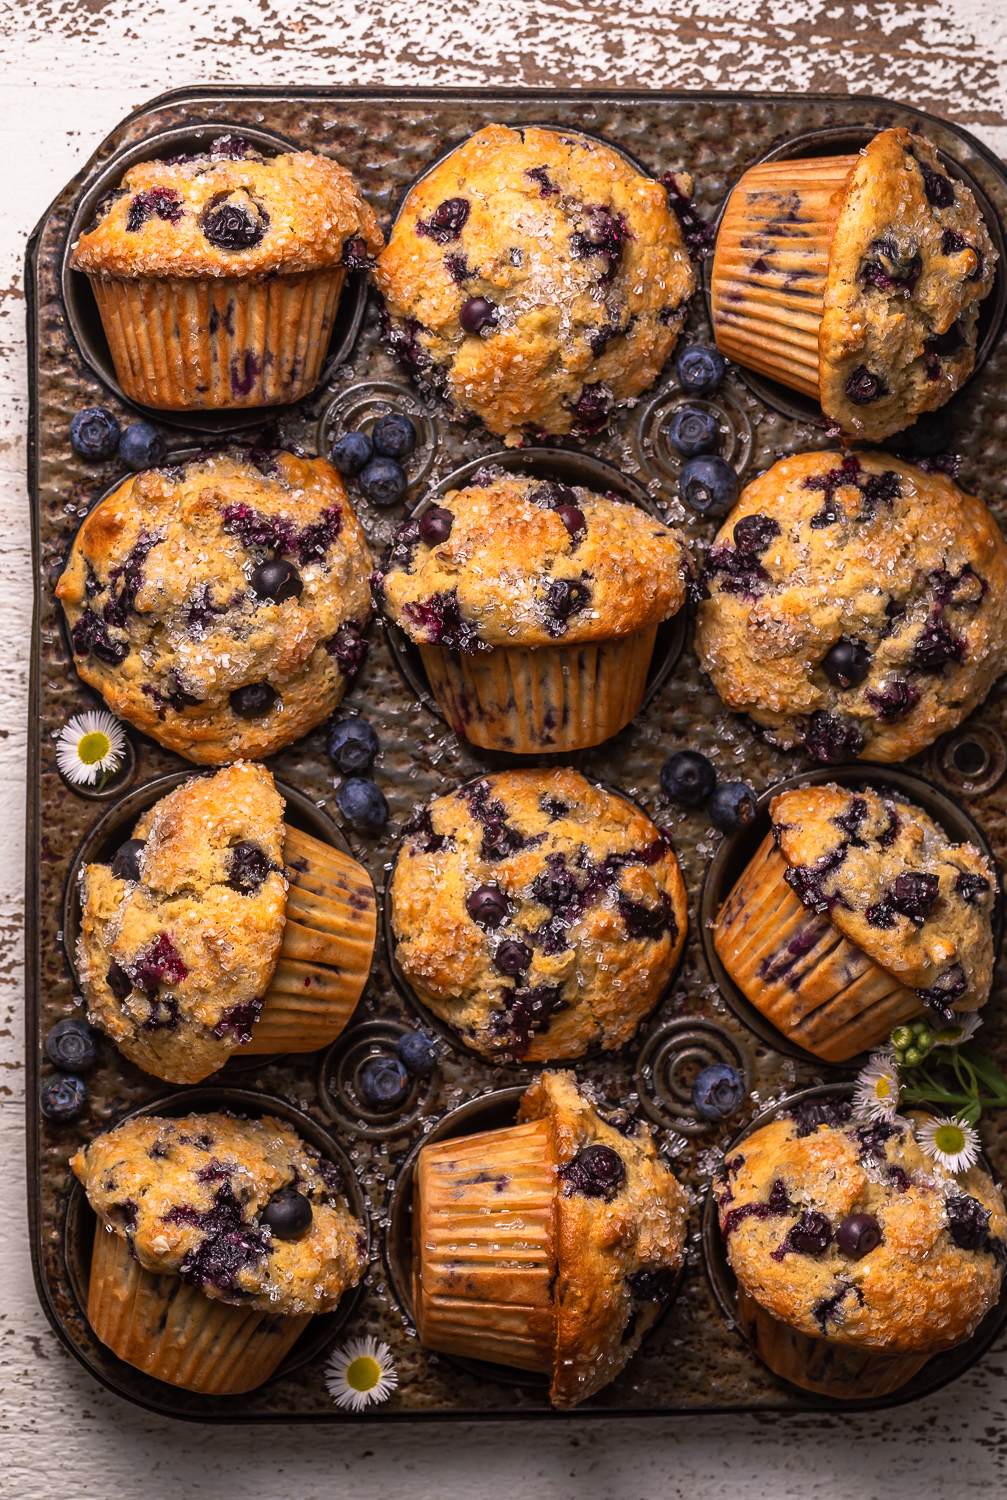 Not too sweet and delightfully moist, these Banana Blueberry Muffins are the perfect breakfast treat! Fresh blueberries work best, but frozen blueberries will work in a pinch. Be sure to fill the muffin cups all the way up to the top for giant domed muffin tops!